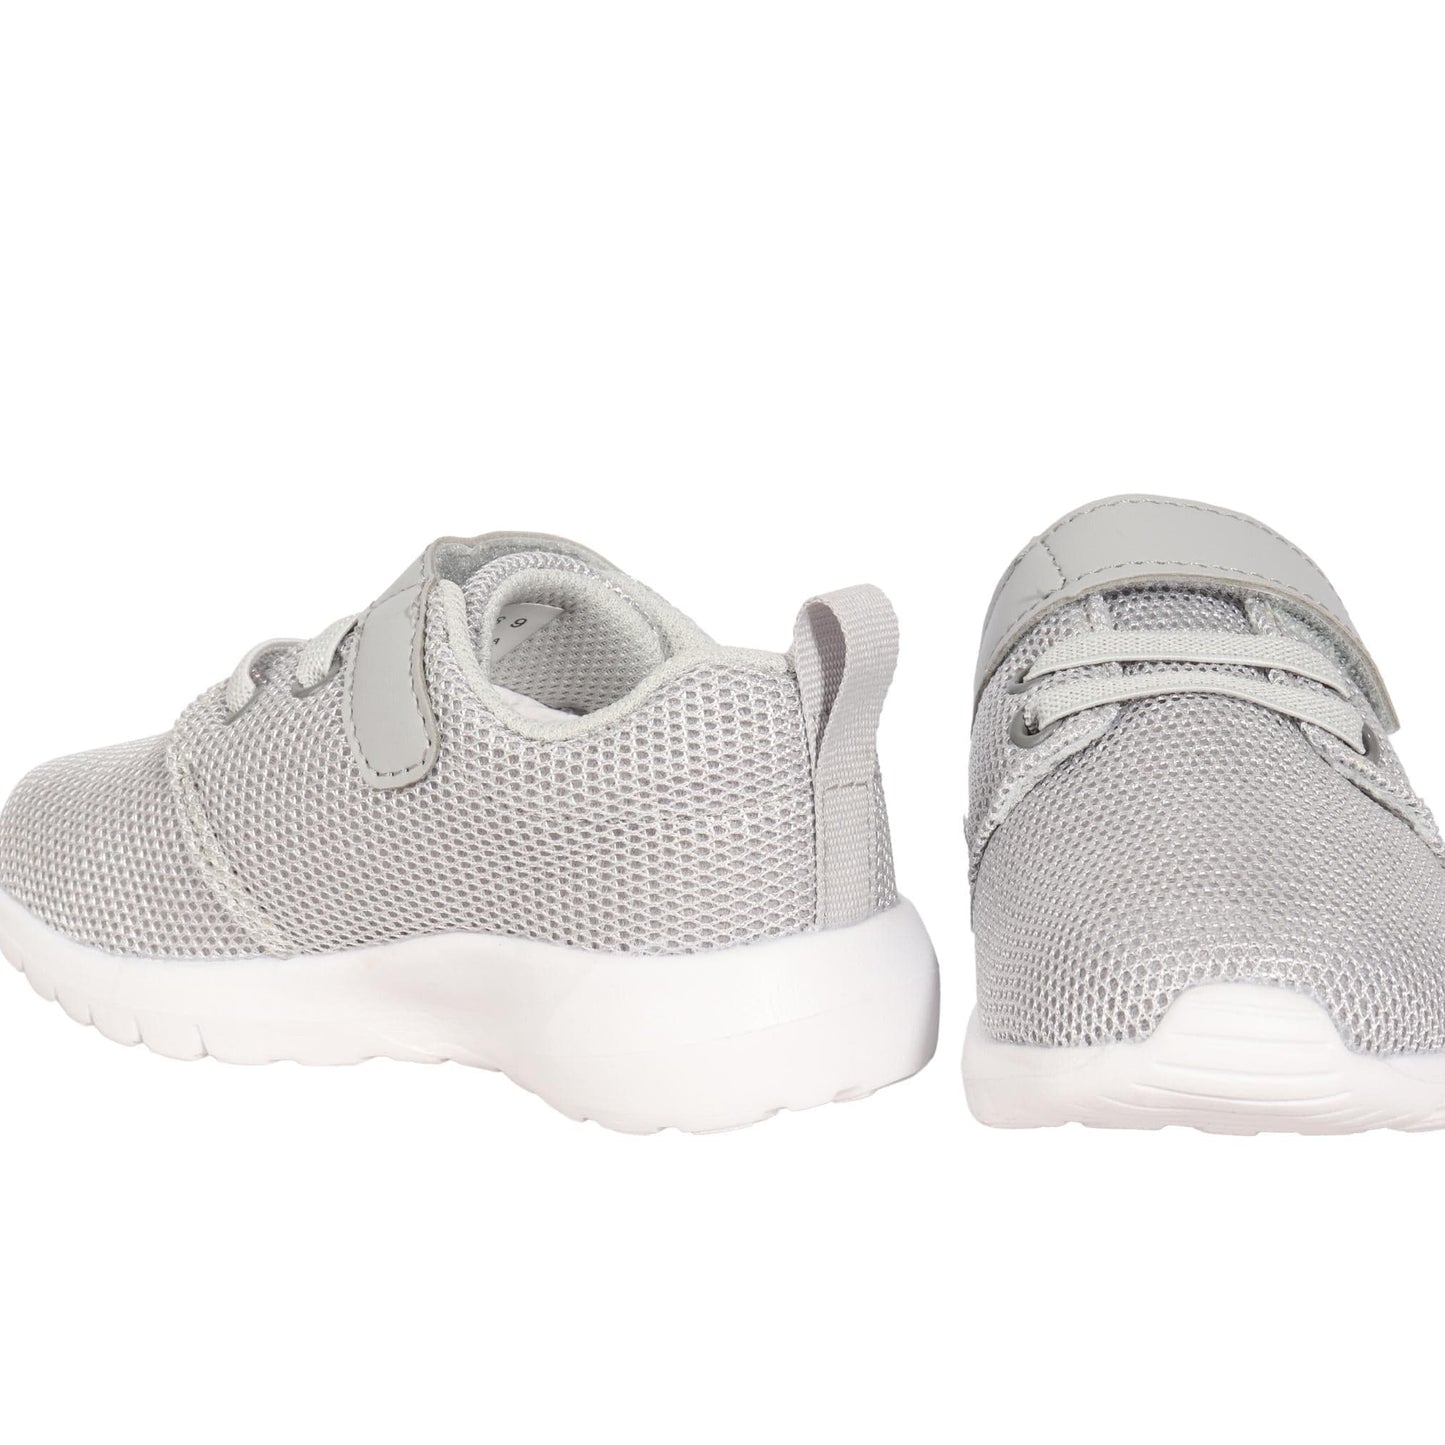 SKYWHEEL Baby Shoes SKYWHEEL - Baby - Lightweight Breathable Running Shoes